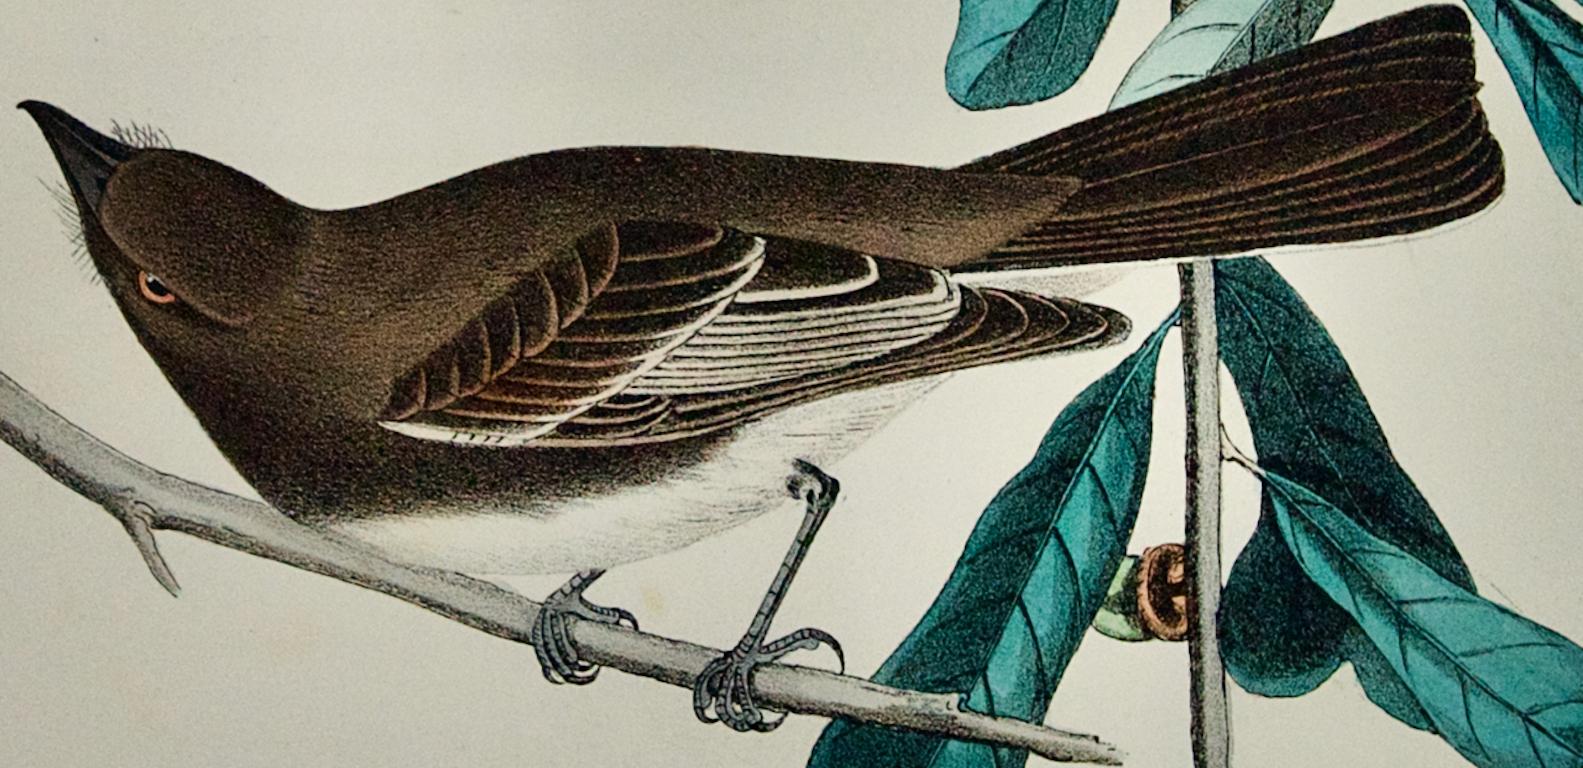 This is an original 19th century John James Audubon hand-colored 1st octavo edition lithograph entitled 